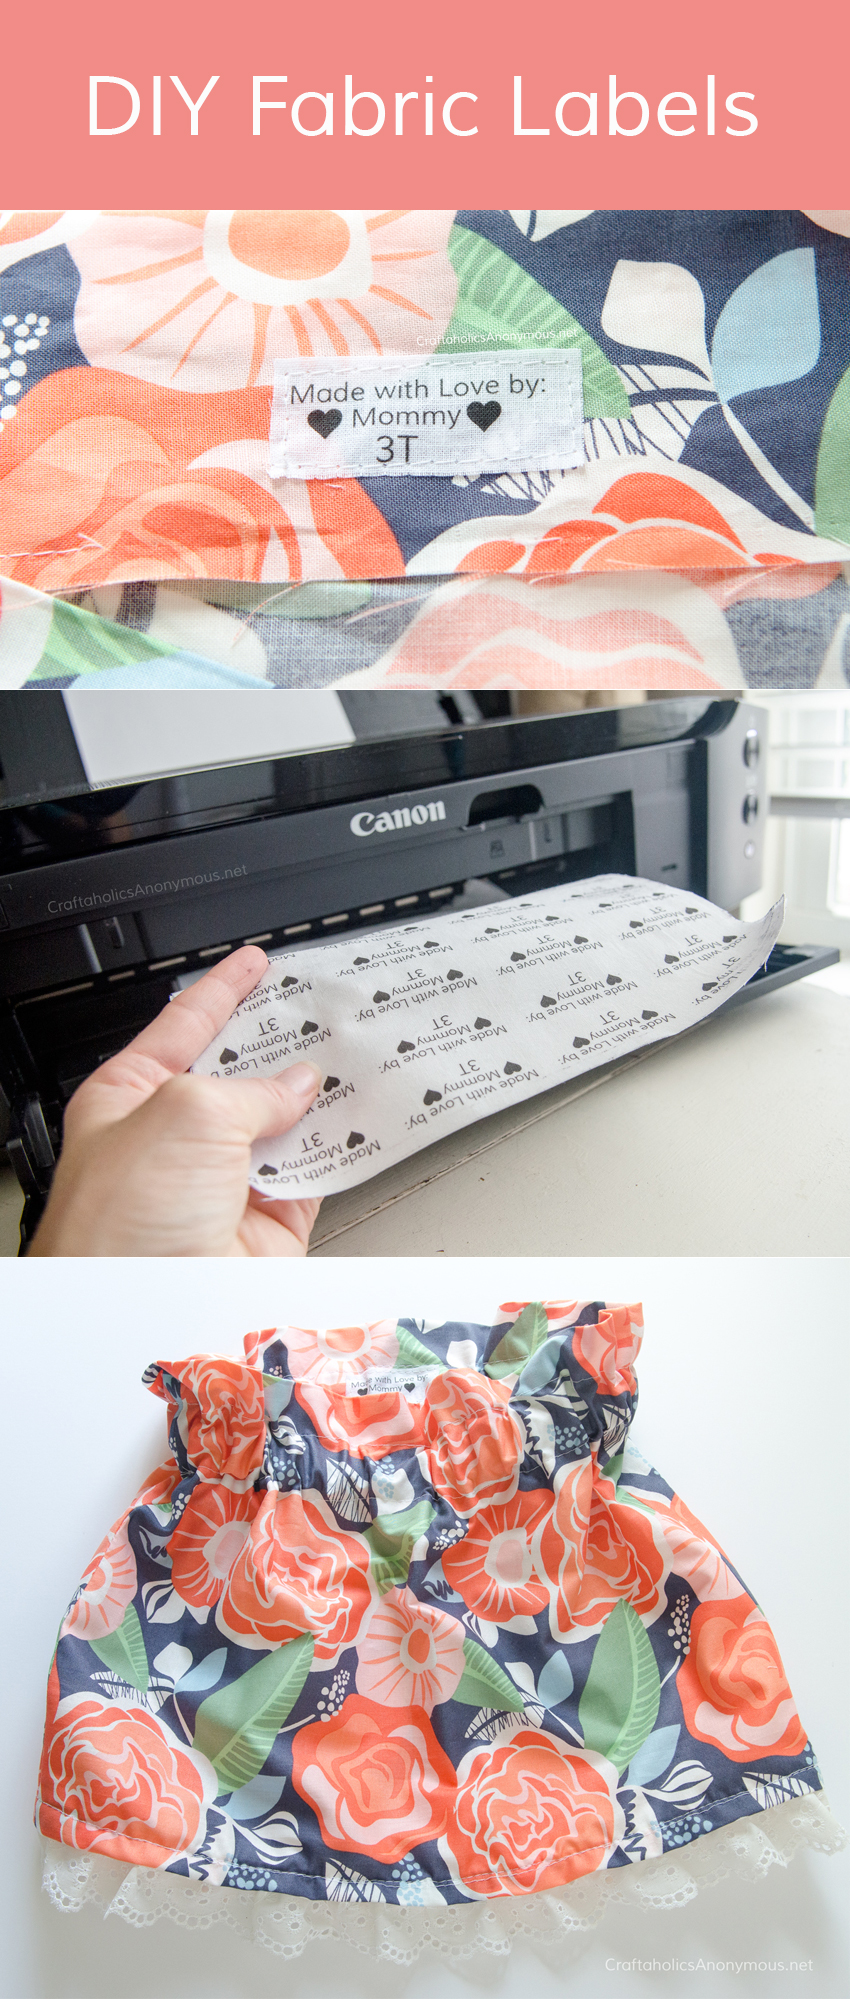 Make your own DIY Fabric Labels with your printer!